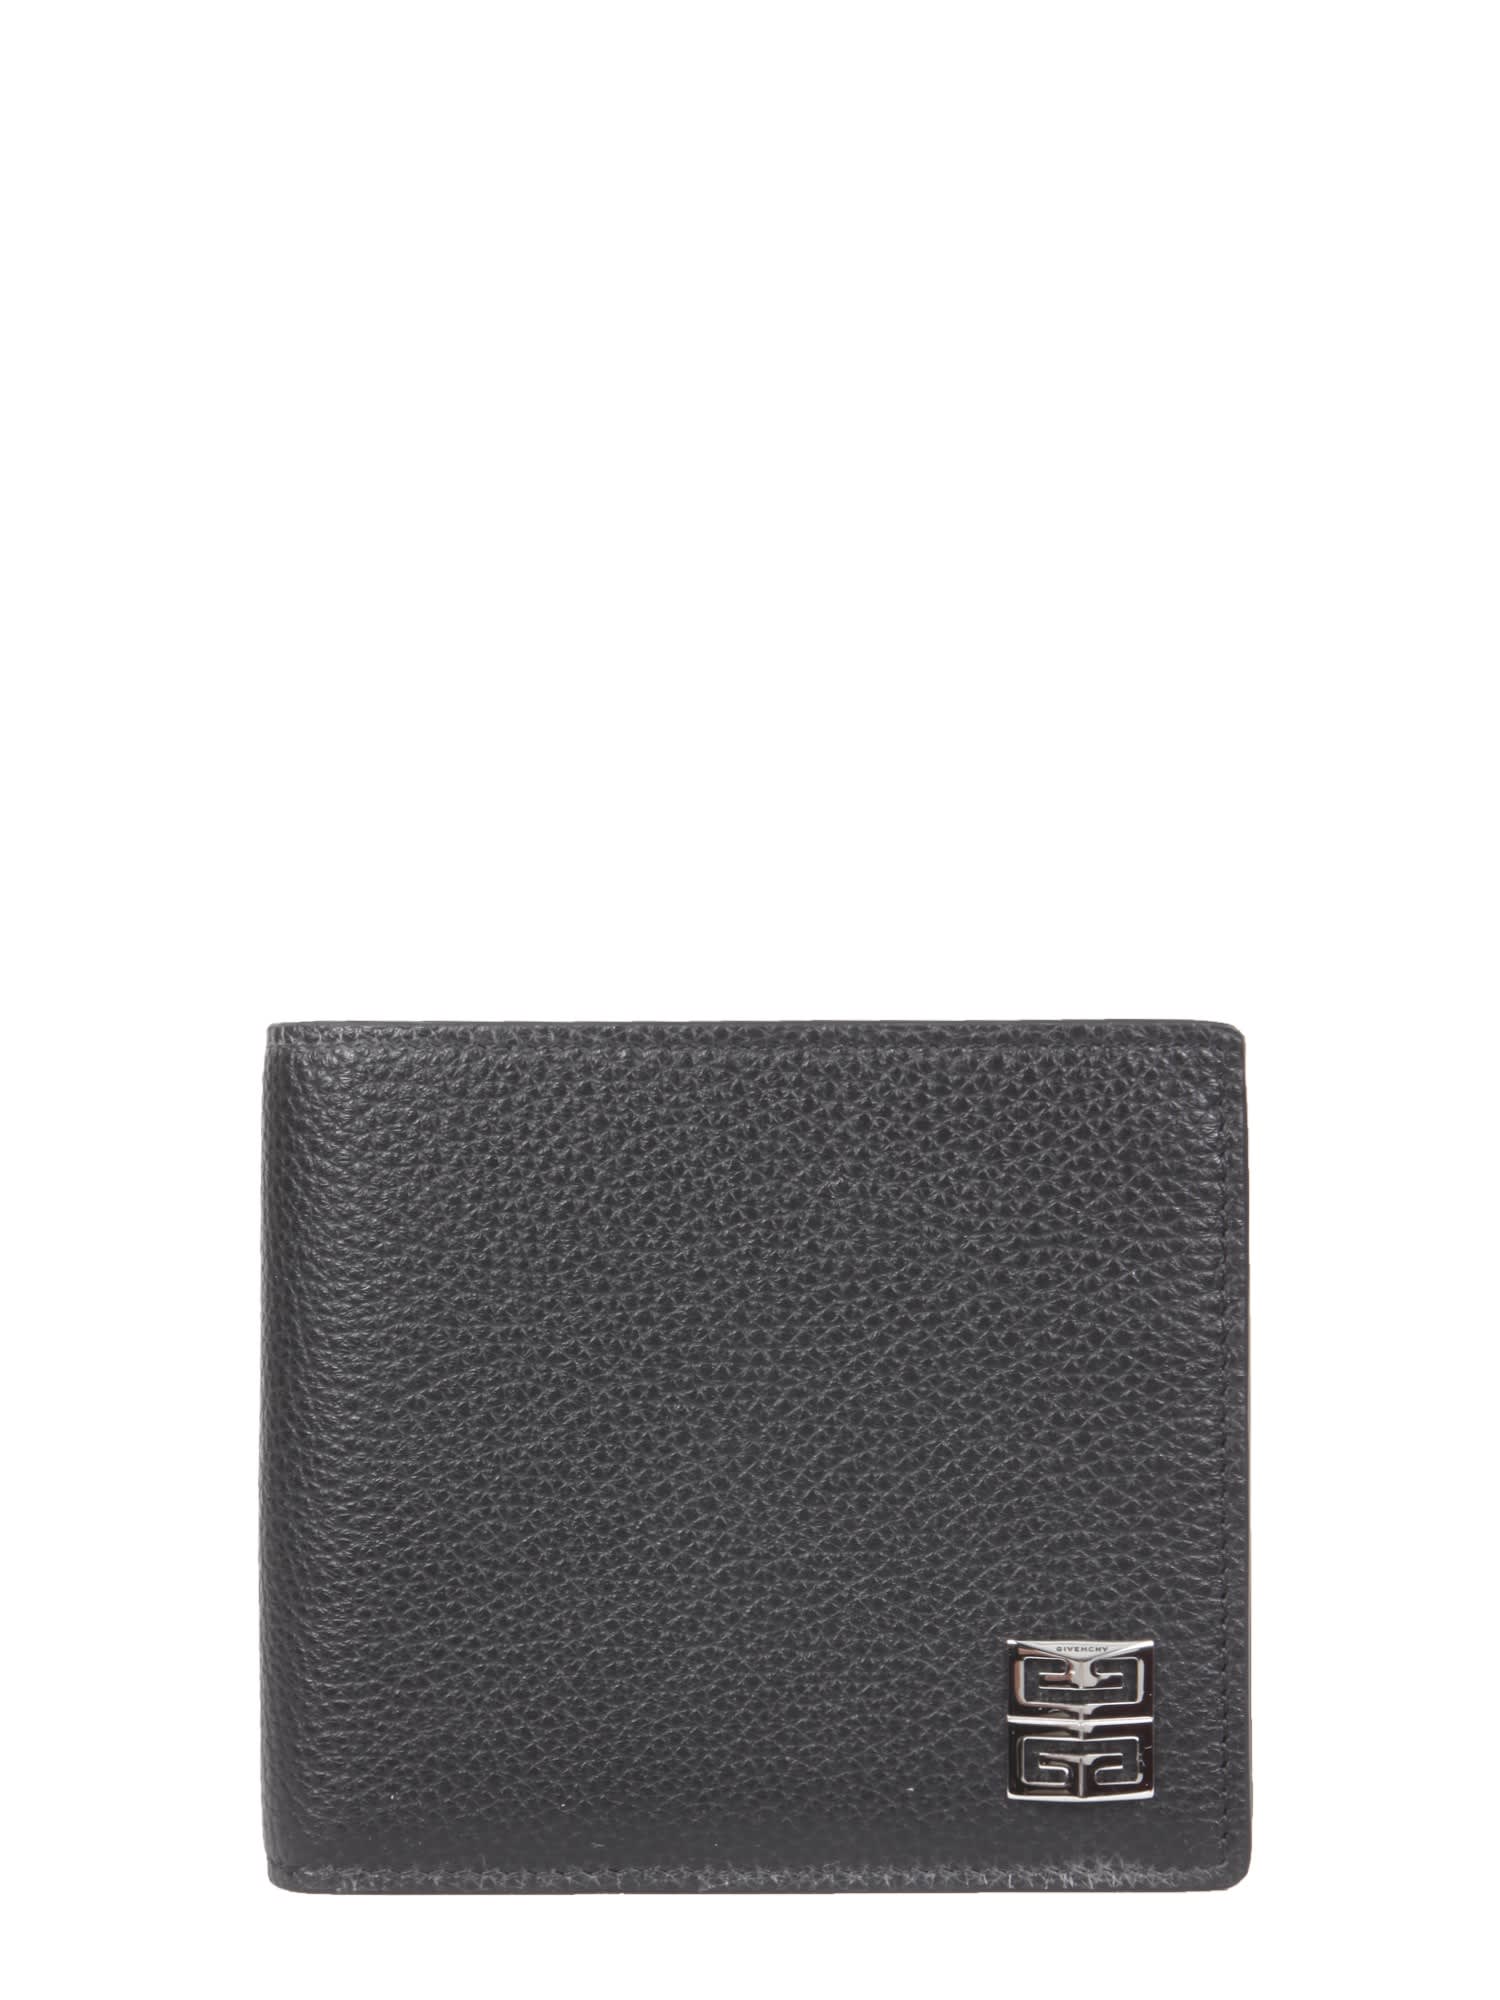 Givenchy Flower Leather Wallet